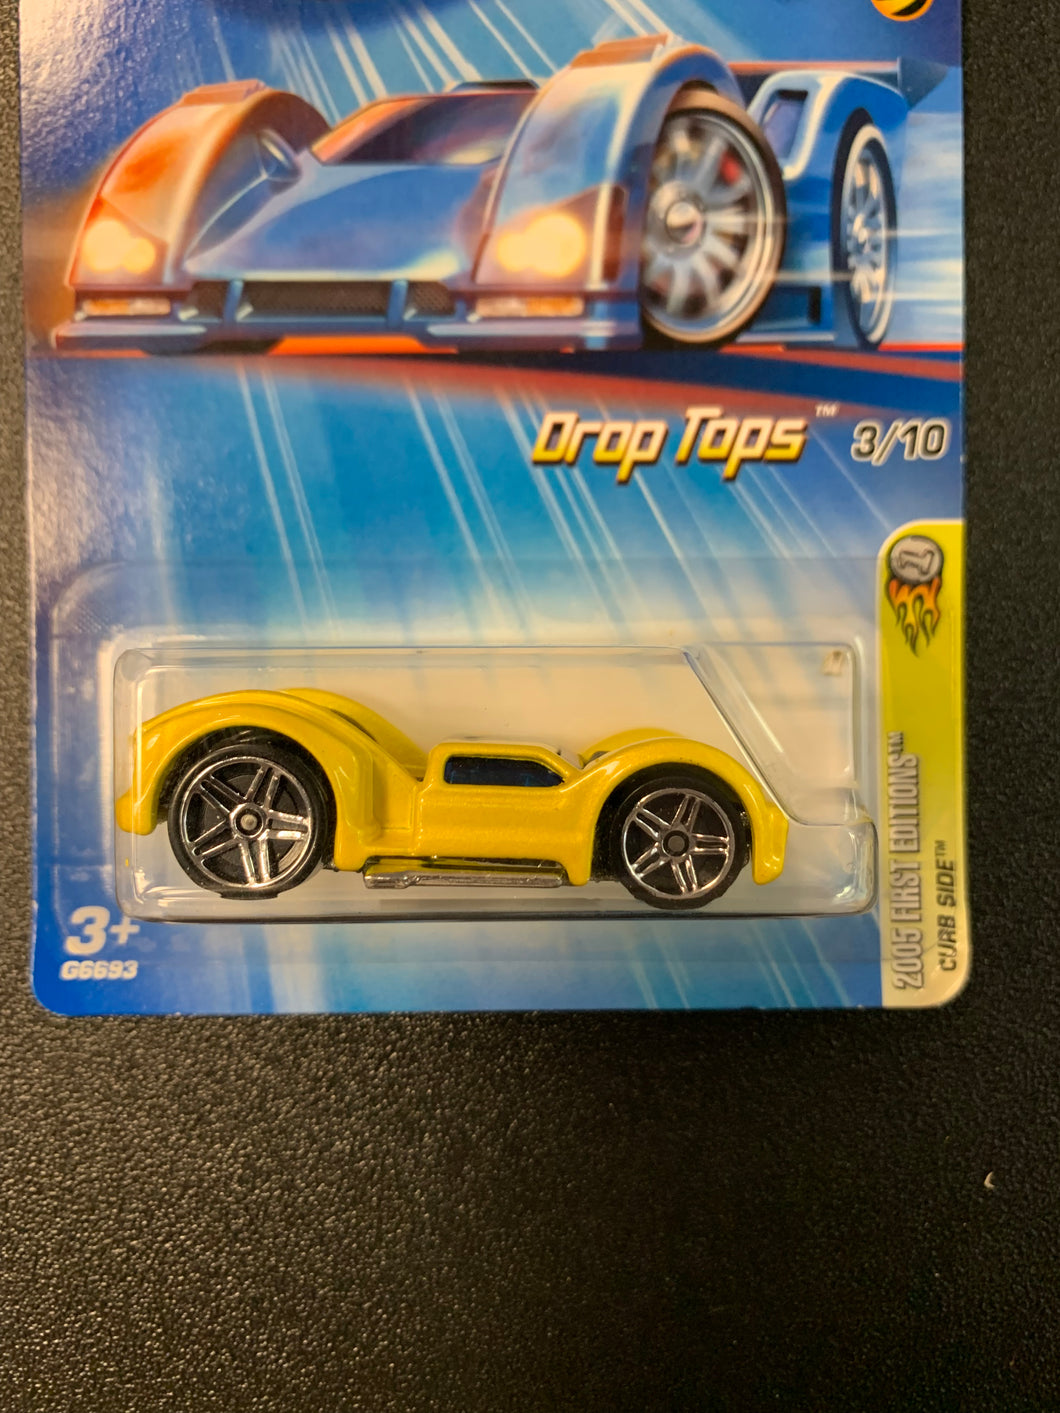 HOT WHEELS 2005 FIRST EDITIONS CURB SIDE DROP TOPS 3/10 023